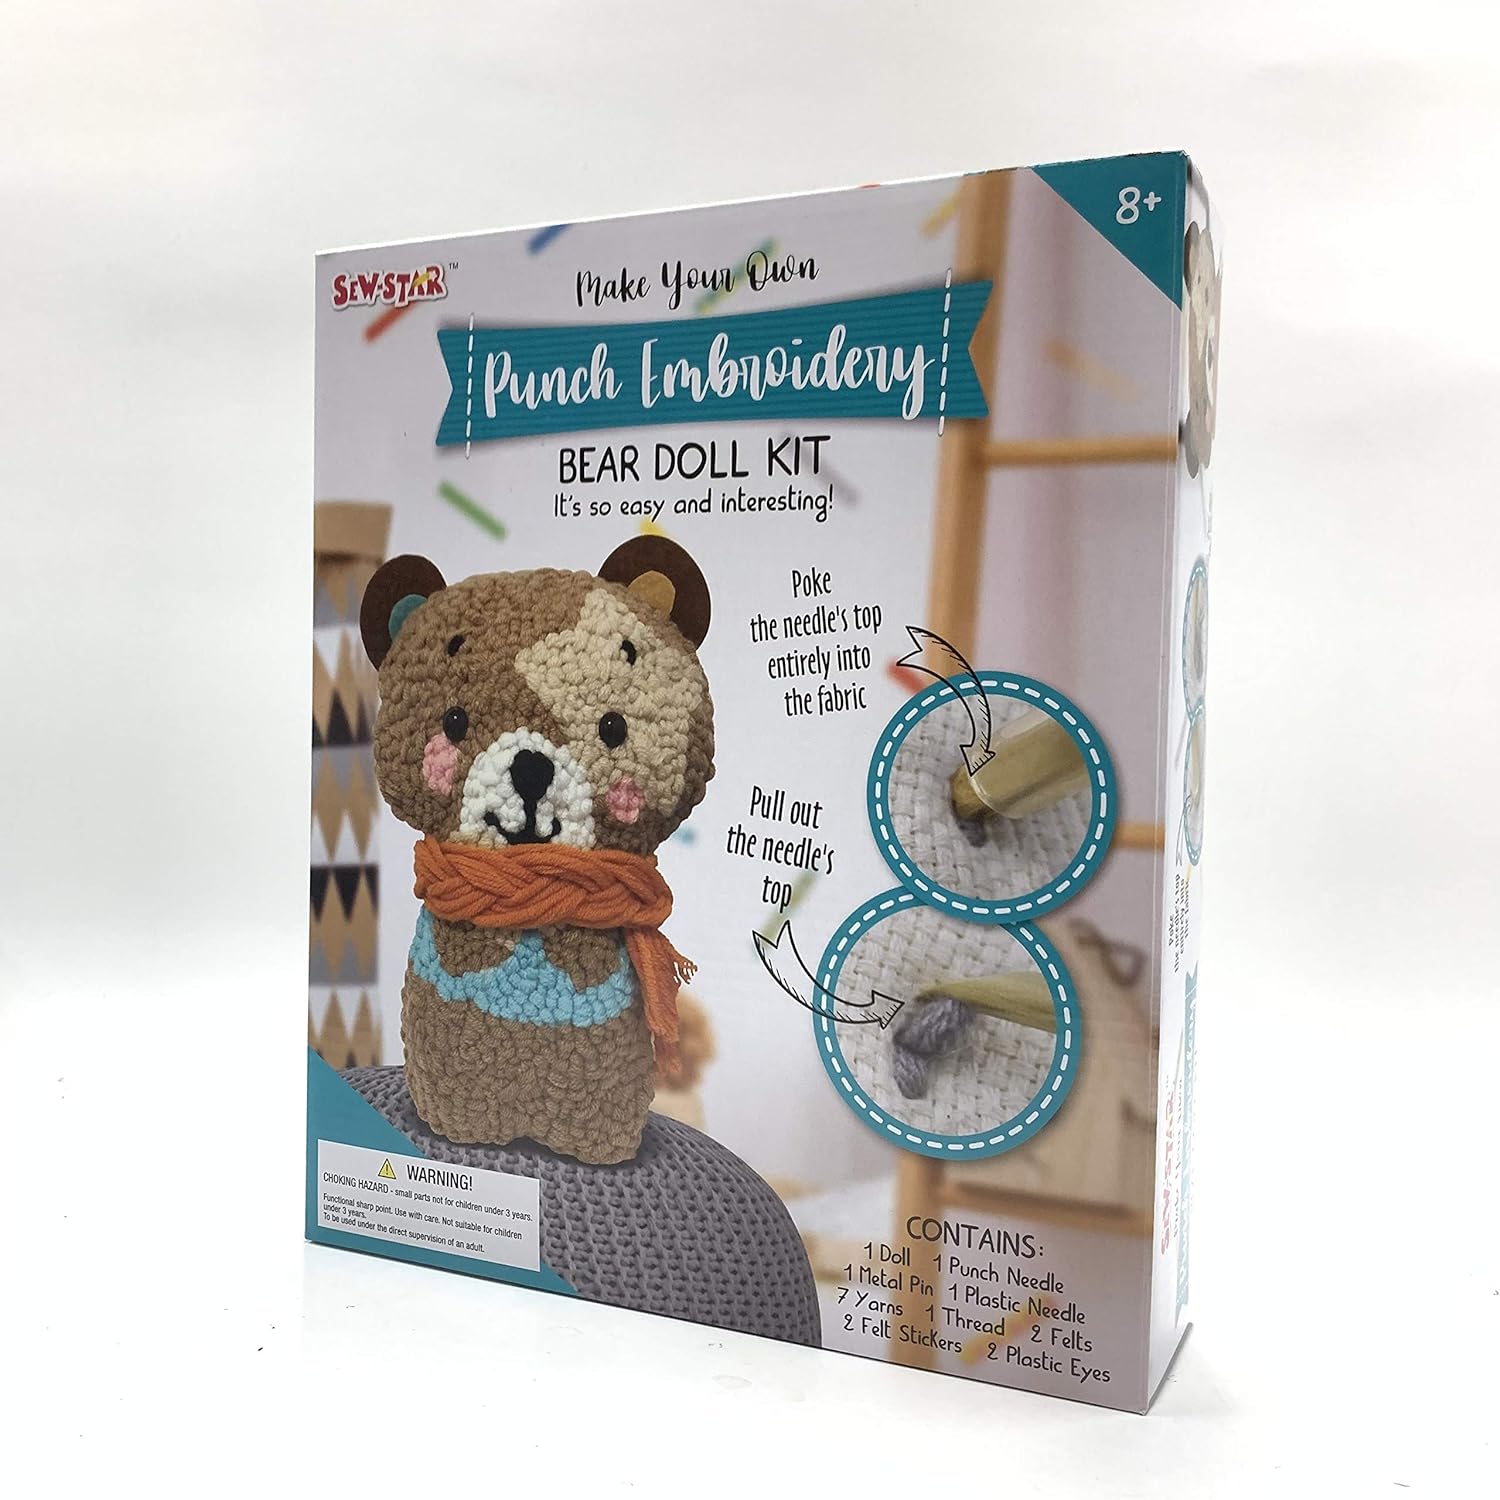 Punch Embroidery Kit - Bear Doll